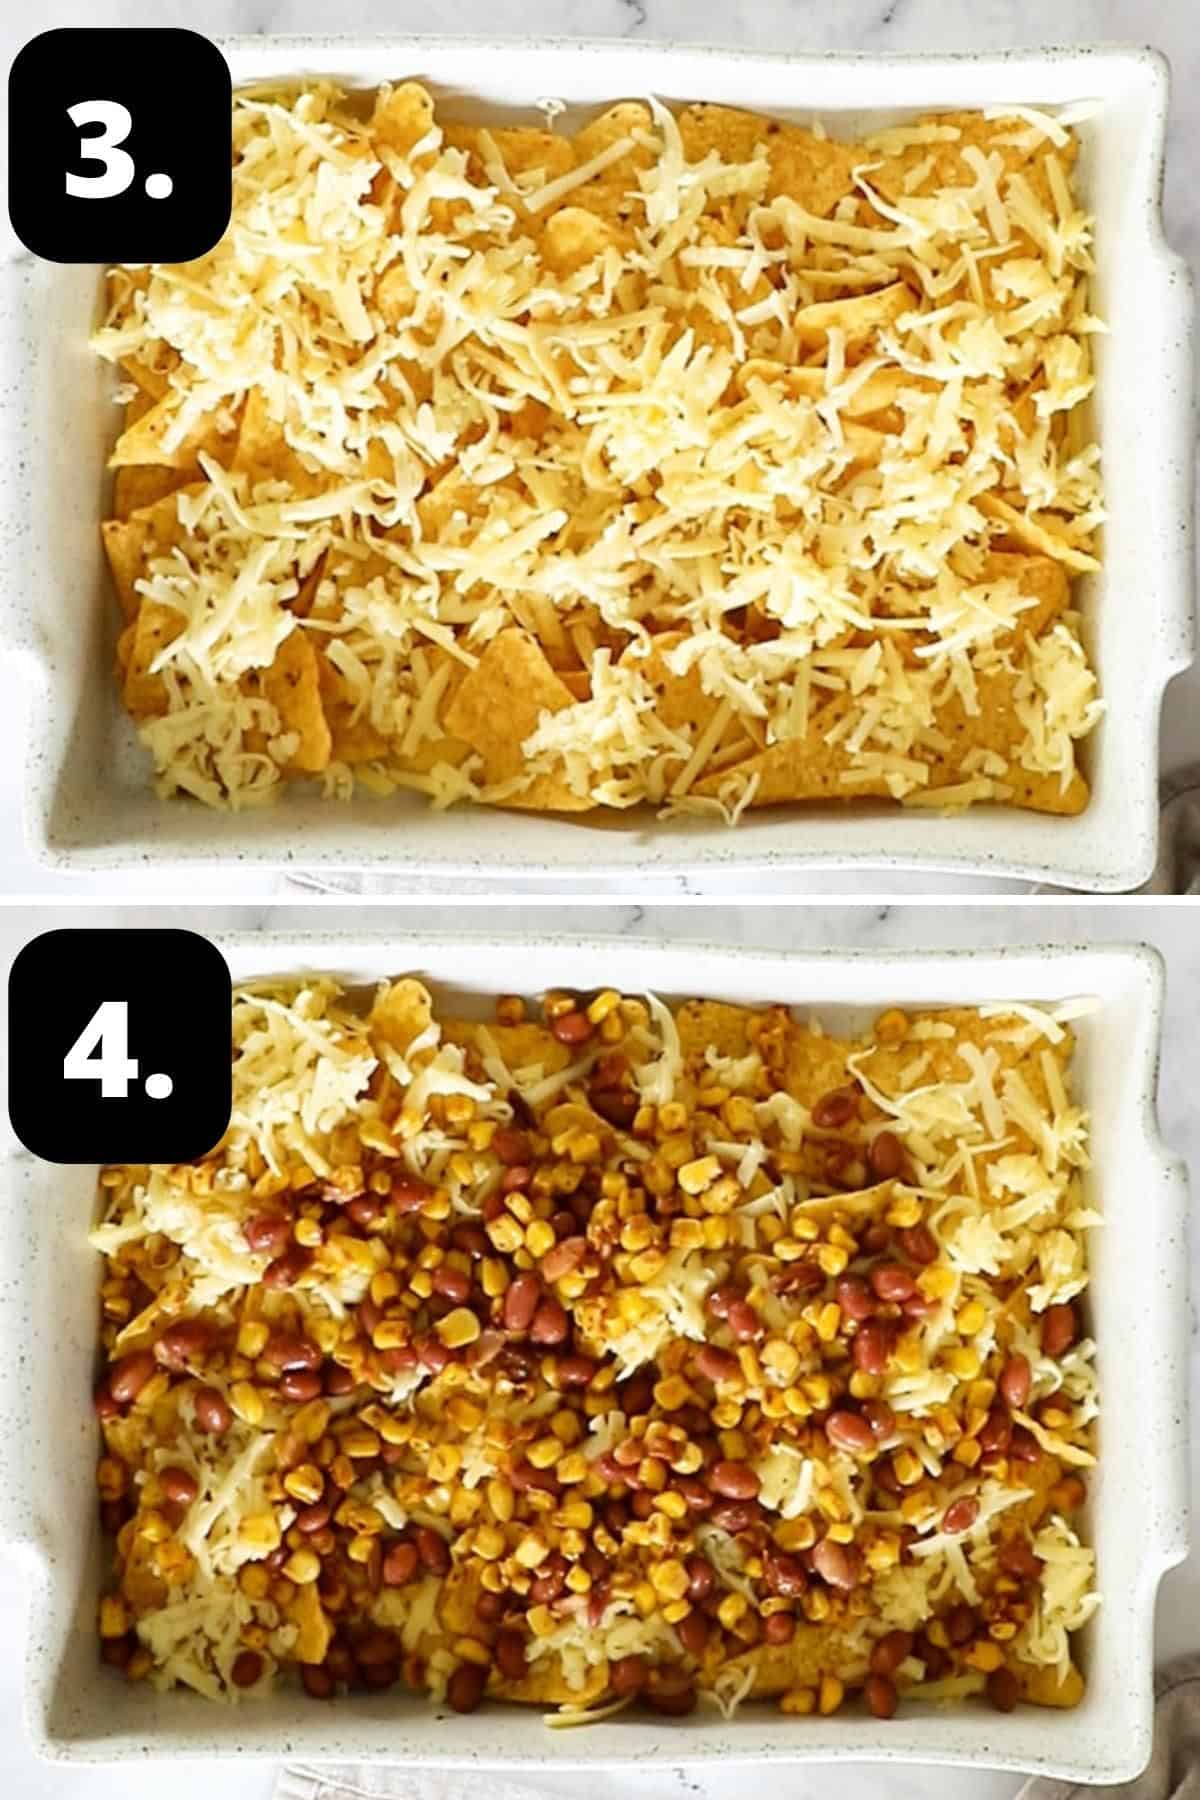 Steps 3-4 of preparing this recipe: the first layer of corn chips and cheese in a baking dish, and topped with beans and corn.